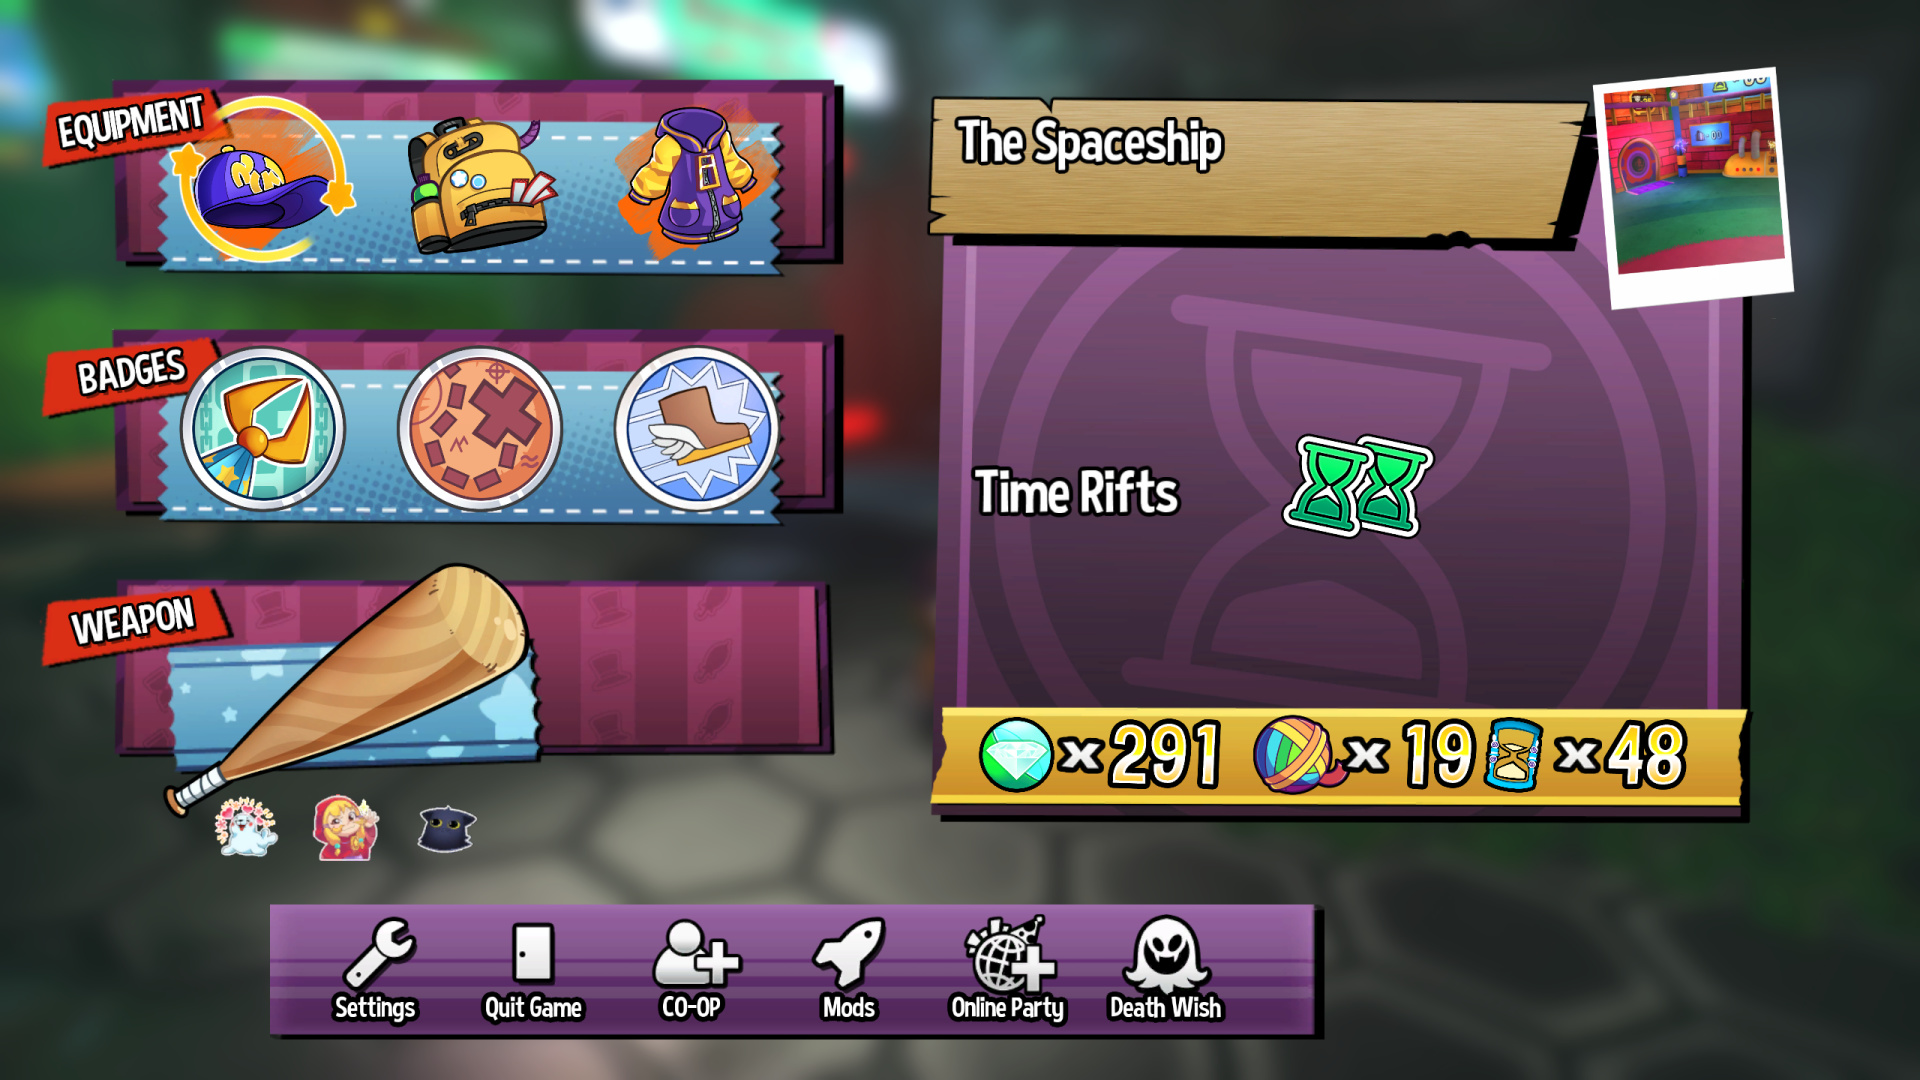 Level menu of the game. Left chart: The player completed levels 1